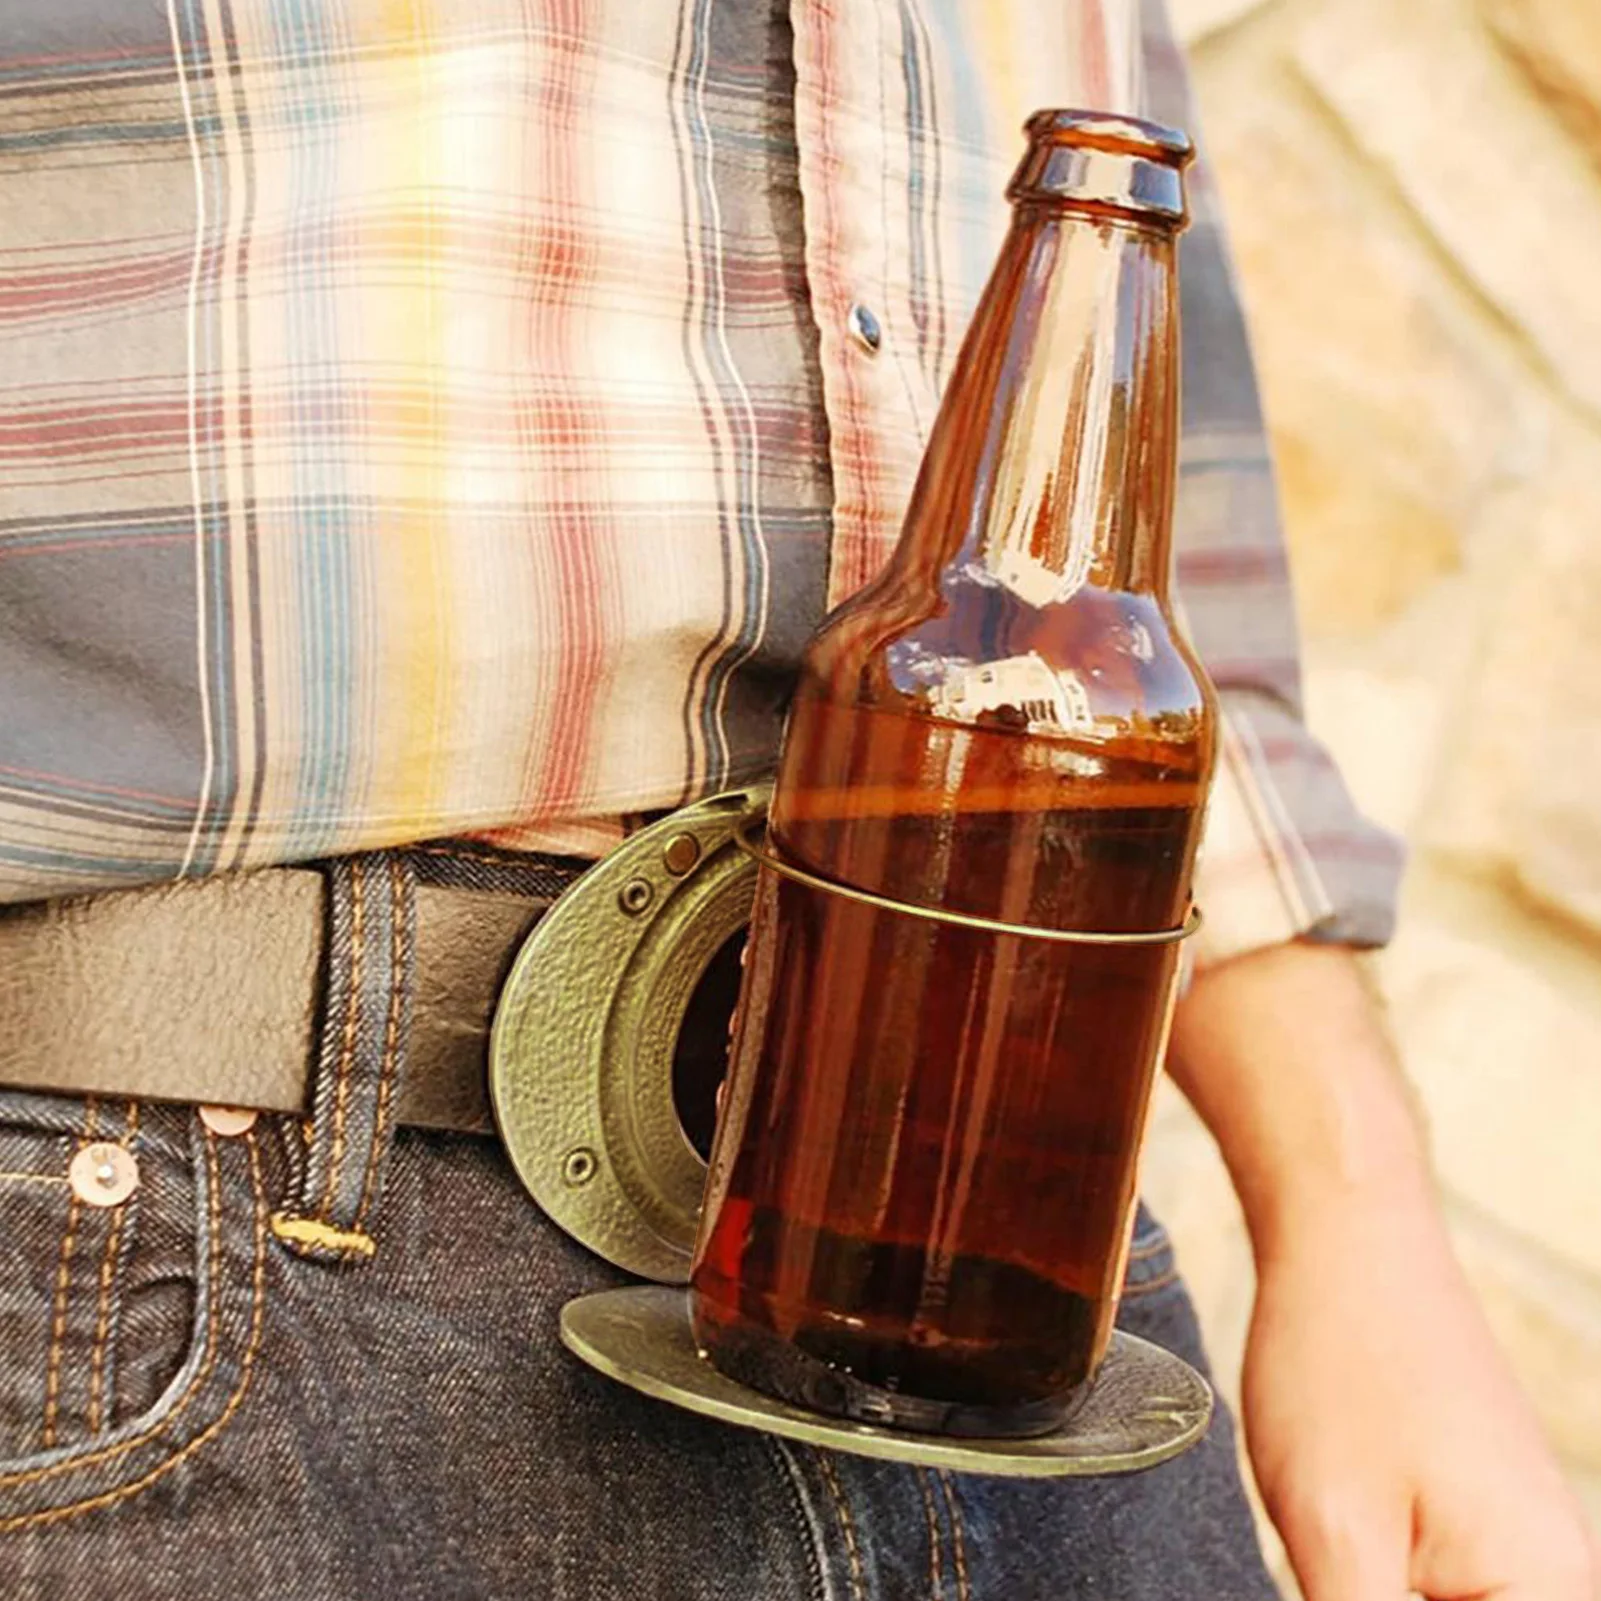 

Beer Holder Belt Buckle Portable Hands-Free Beverage Can Holder Easily Carry Beer Cup Holder With You For Picnic Party BBQ